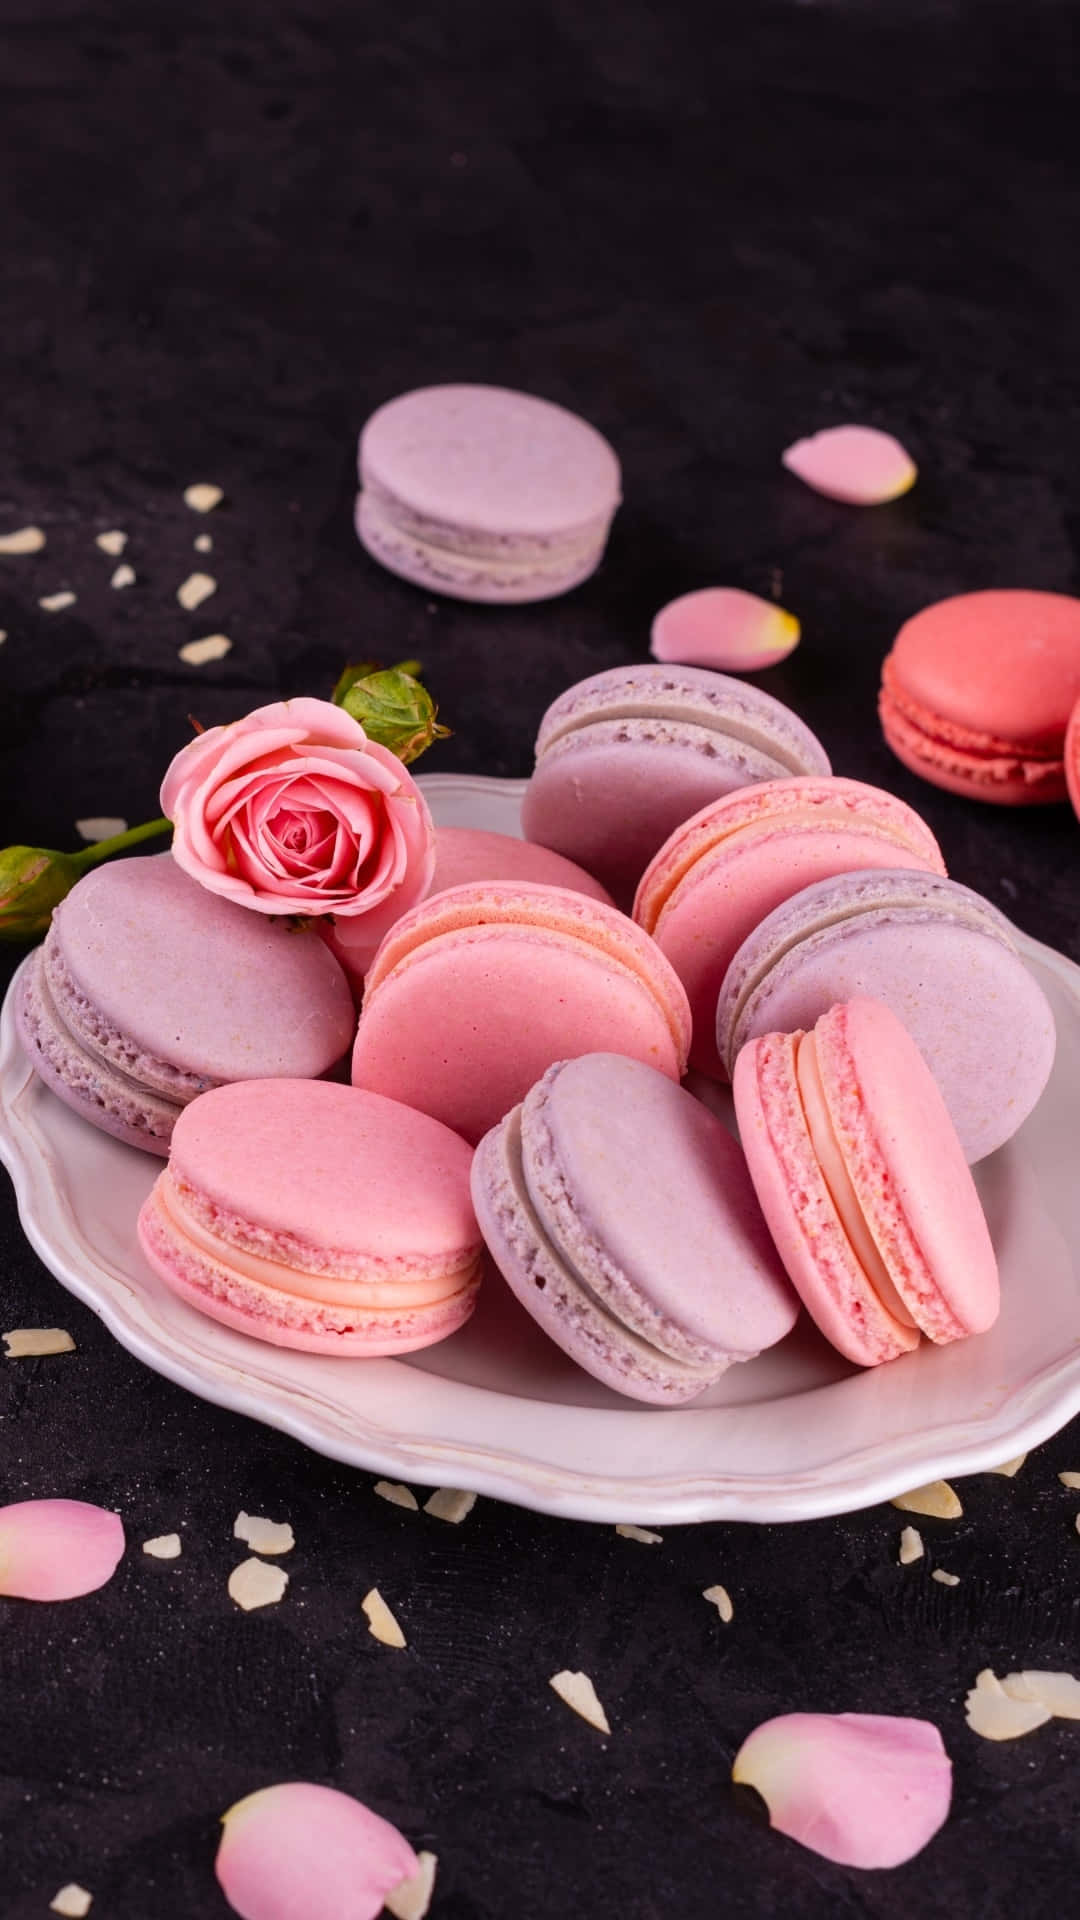 Download Macaron Wallpaper and Backgrounds for your Phone – Olive & Piper